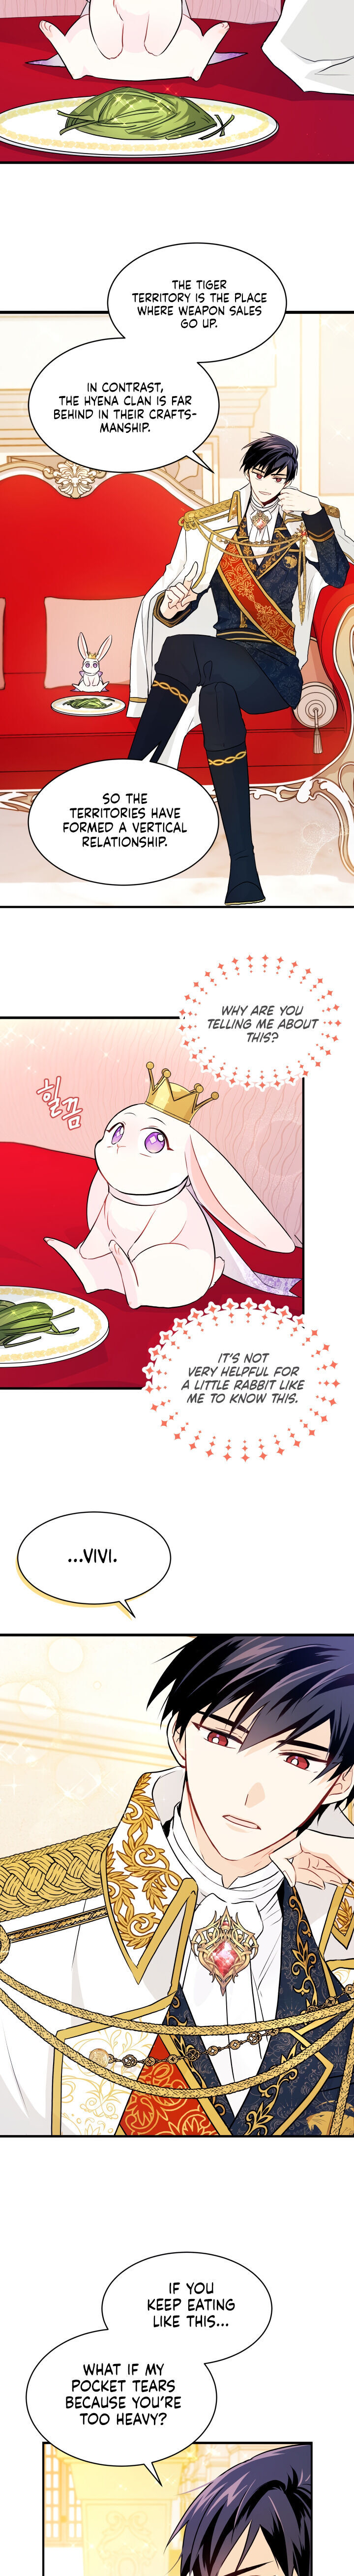 A Symbiotic Relationship Between A Rabbit And A Black Panther - Chapter 18 Page 19